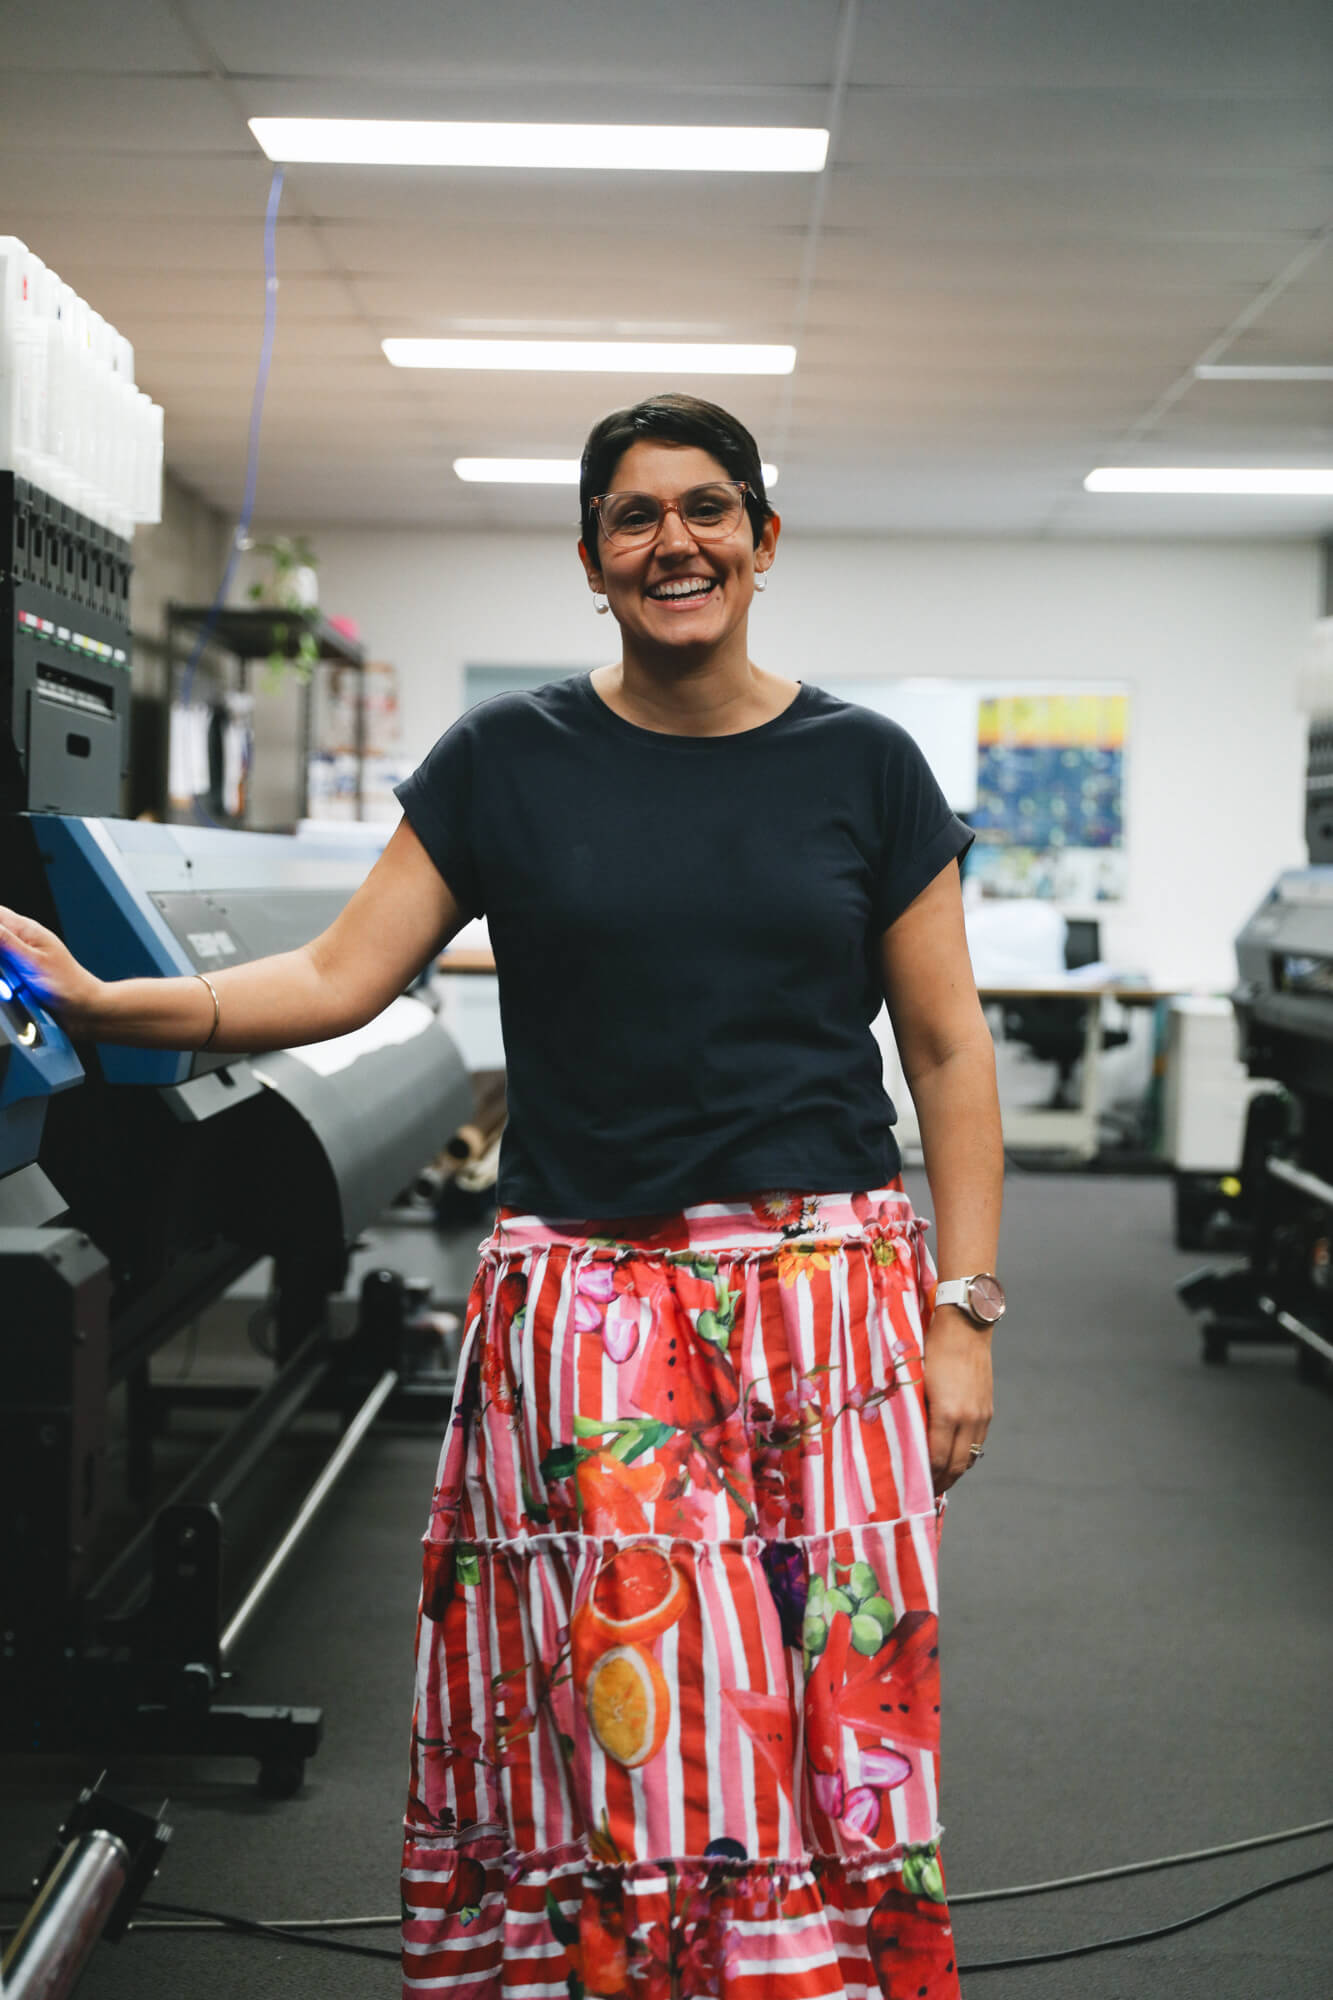 Rameez laughing in the APPLiK Brisbane digital printing studio. She is wearing a black t-shirt an da printed red, pink and yellow skirt.